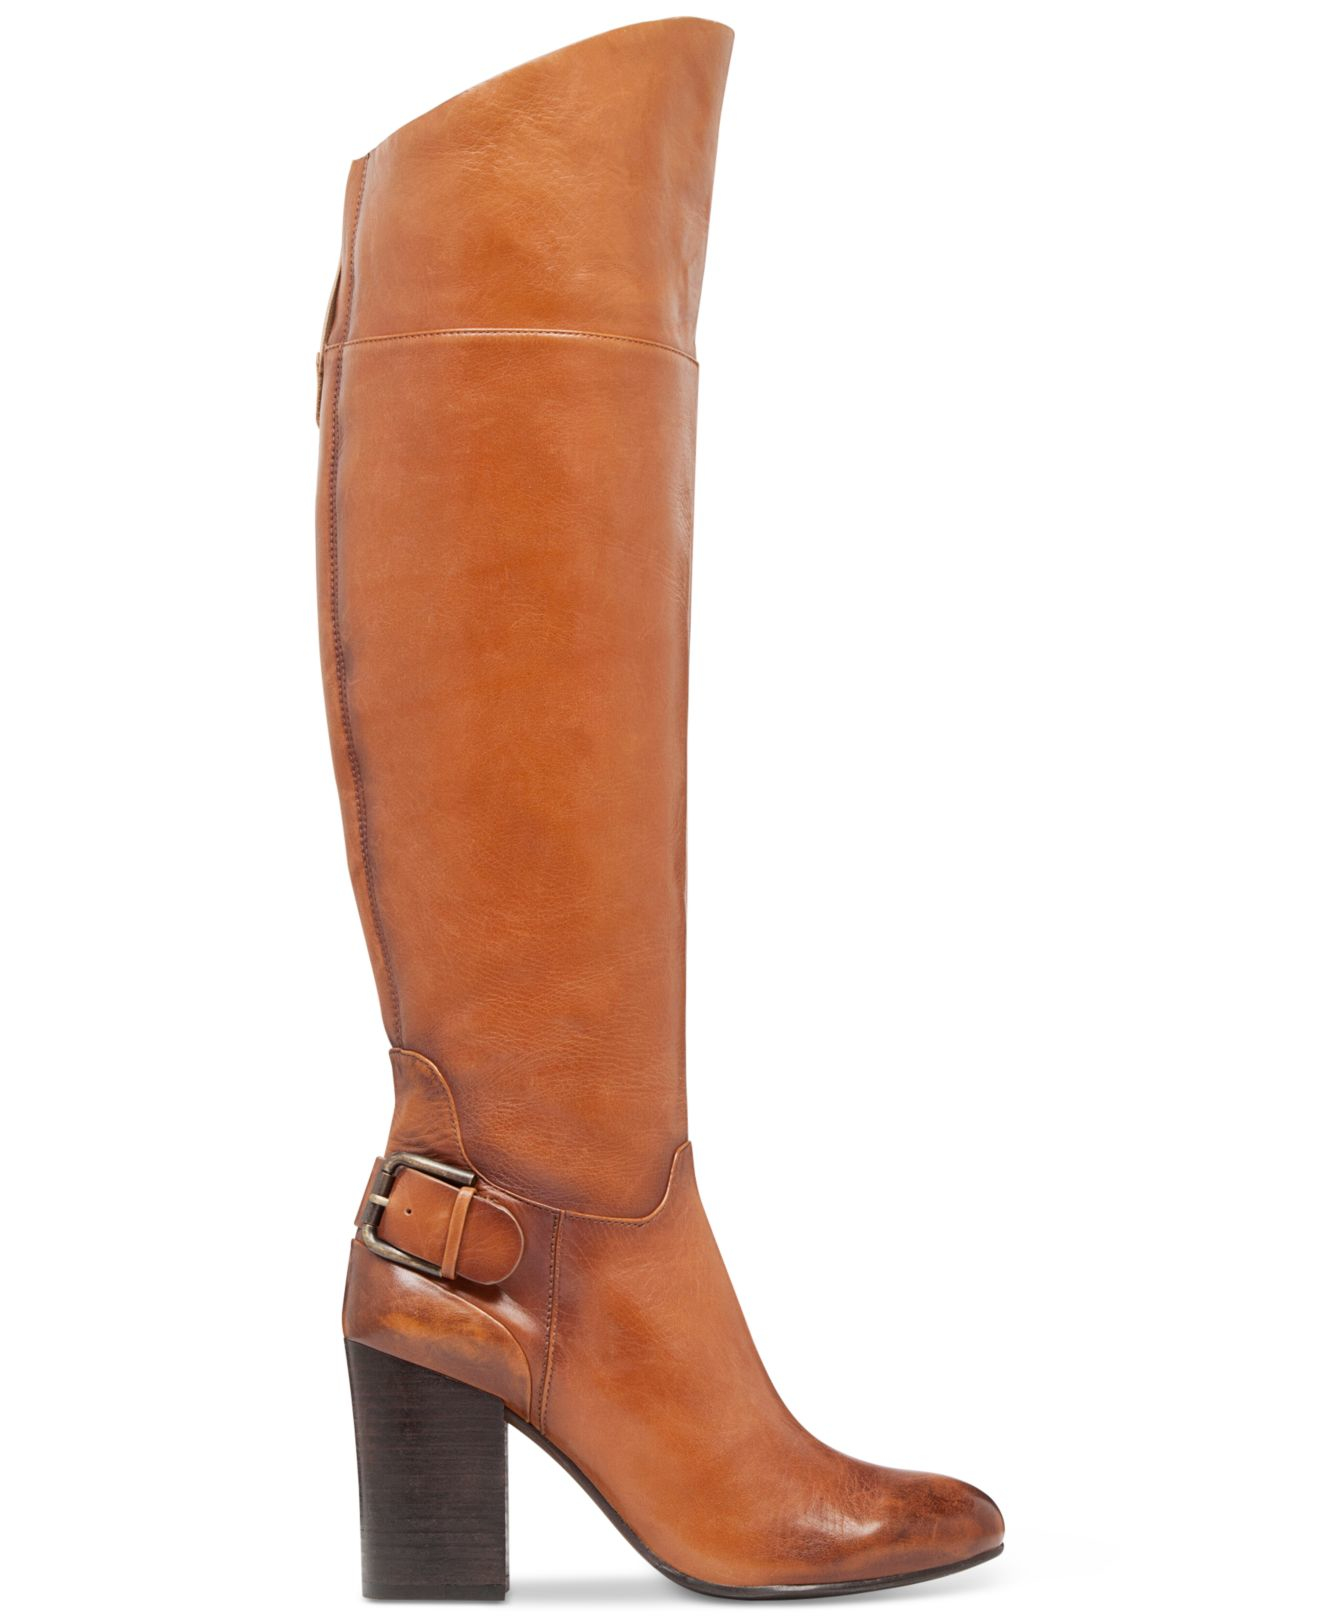 Vince camuto Sidney Tall Boots in Brown (Warm Brown) | Lyst1320 x 1616